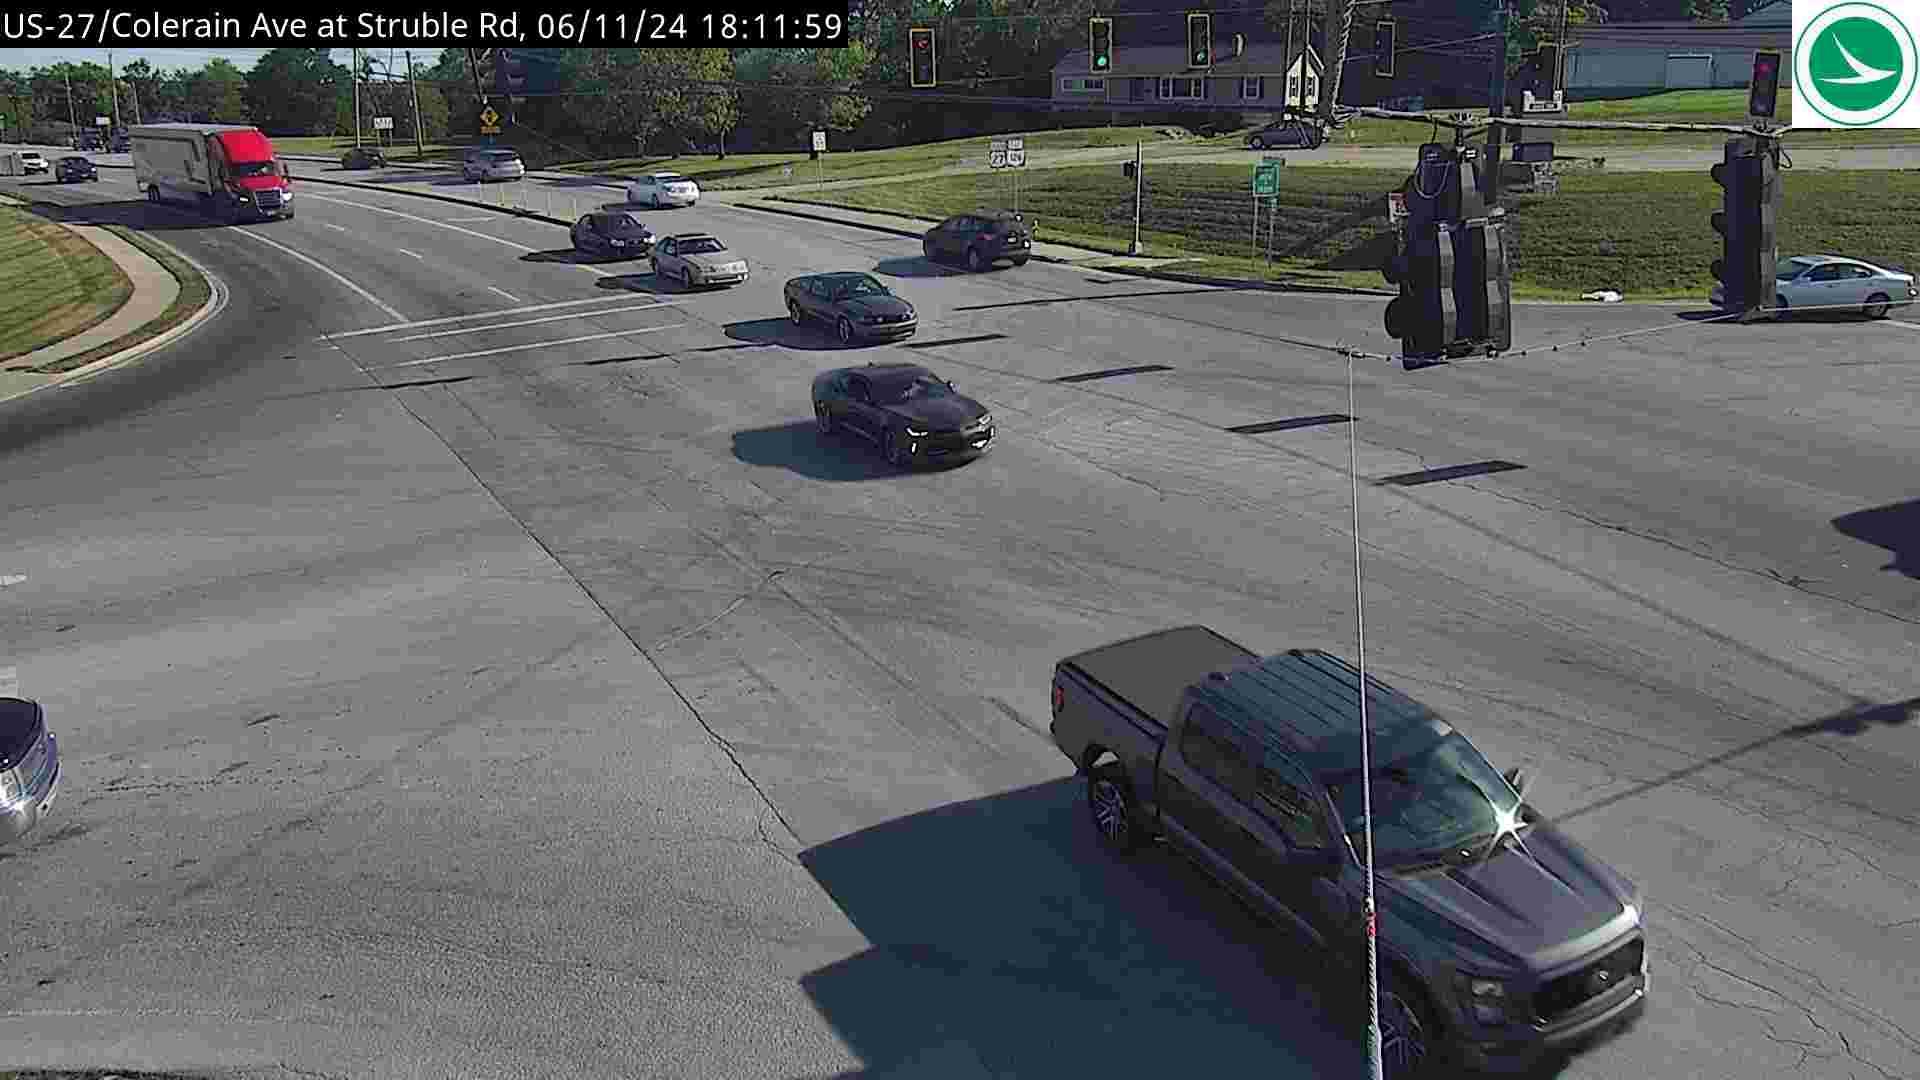 Traffic Cam Bevis: US-27/Colerain Ave at Struble Rd